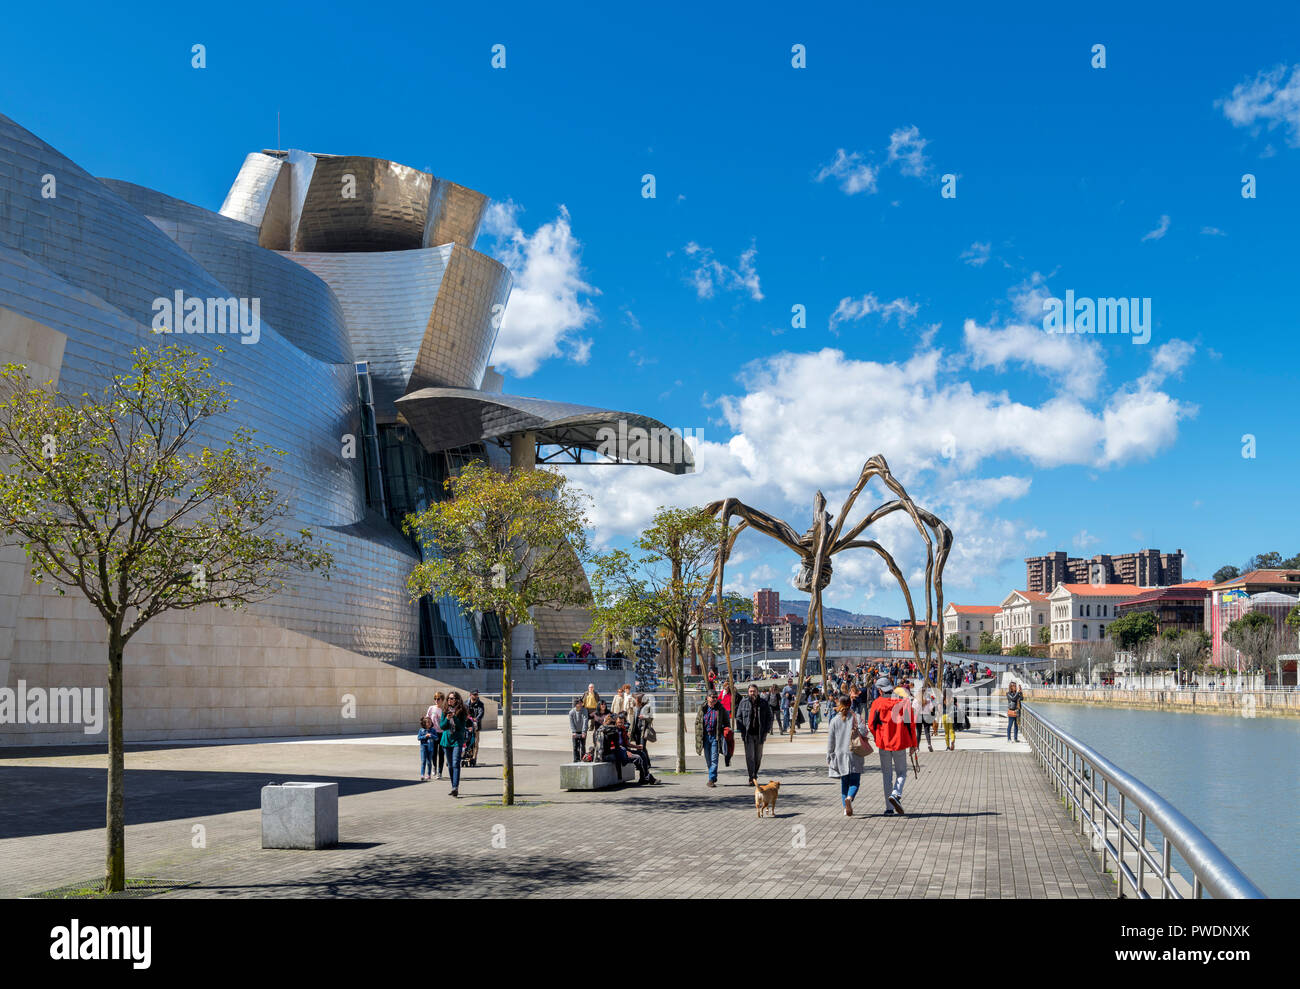 Guggenheim Bilbao. Giant spider sculpture Maman, by Louise Bourgeois, outside the Guggenheim Museum, Bilbao, Basque Country, Spain Stock Photo